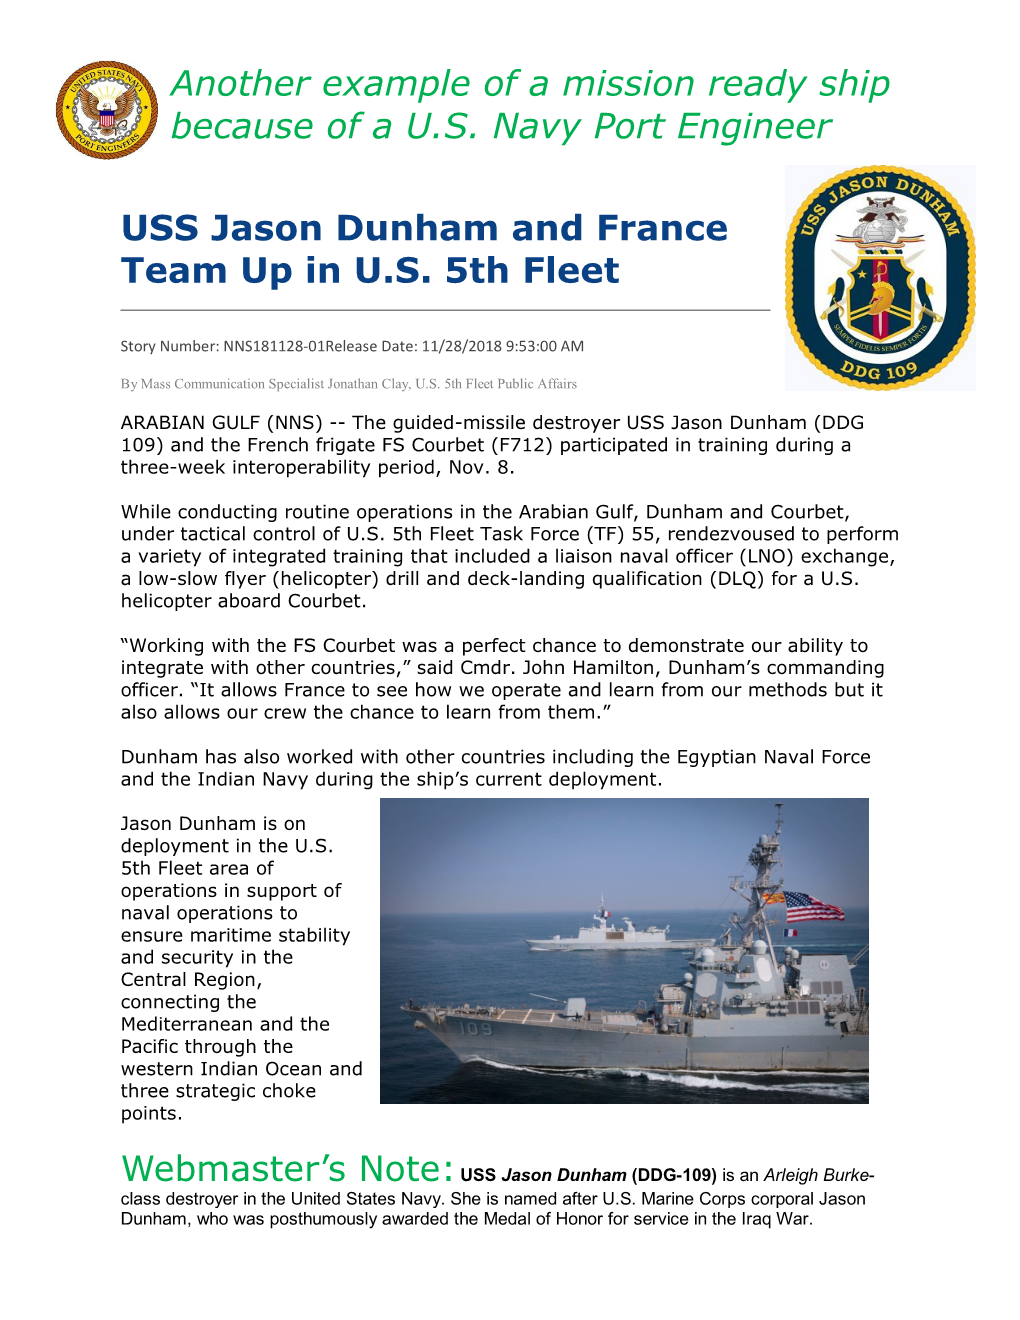 USS Jason Dunham (DDG 109) and the French Frigate FS Courbet (F712) Participated in Training During a Three-Week Interoperability Period, Nov